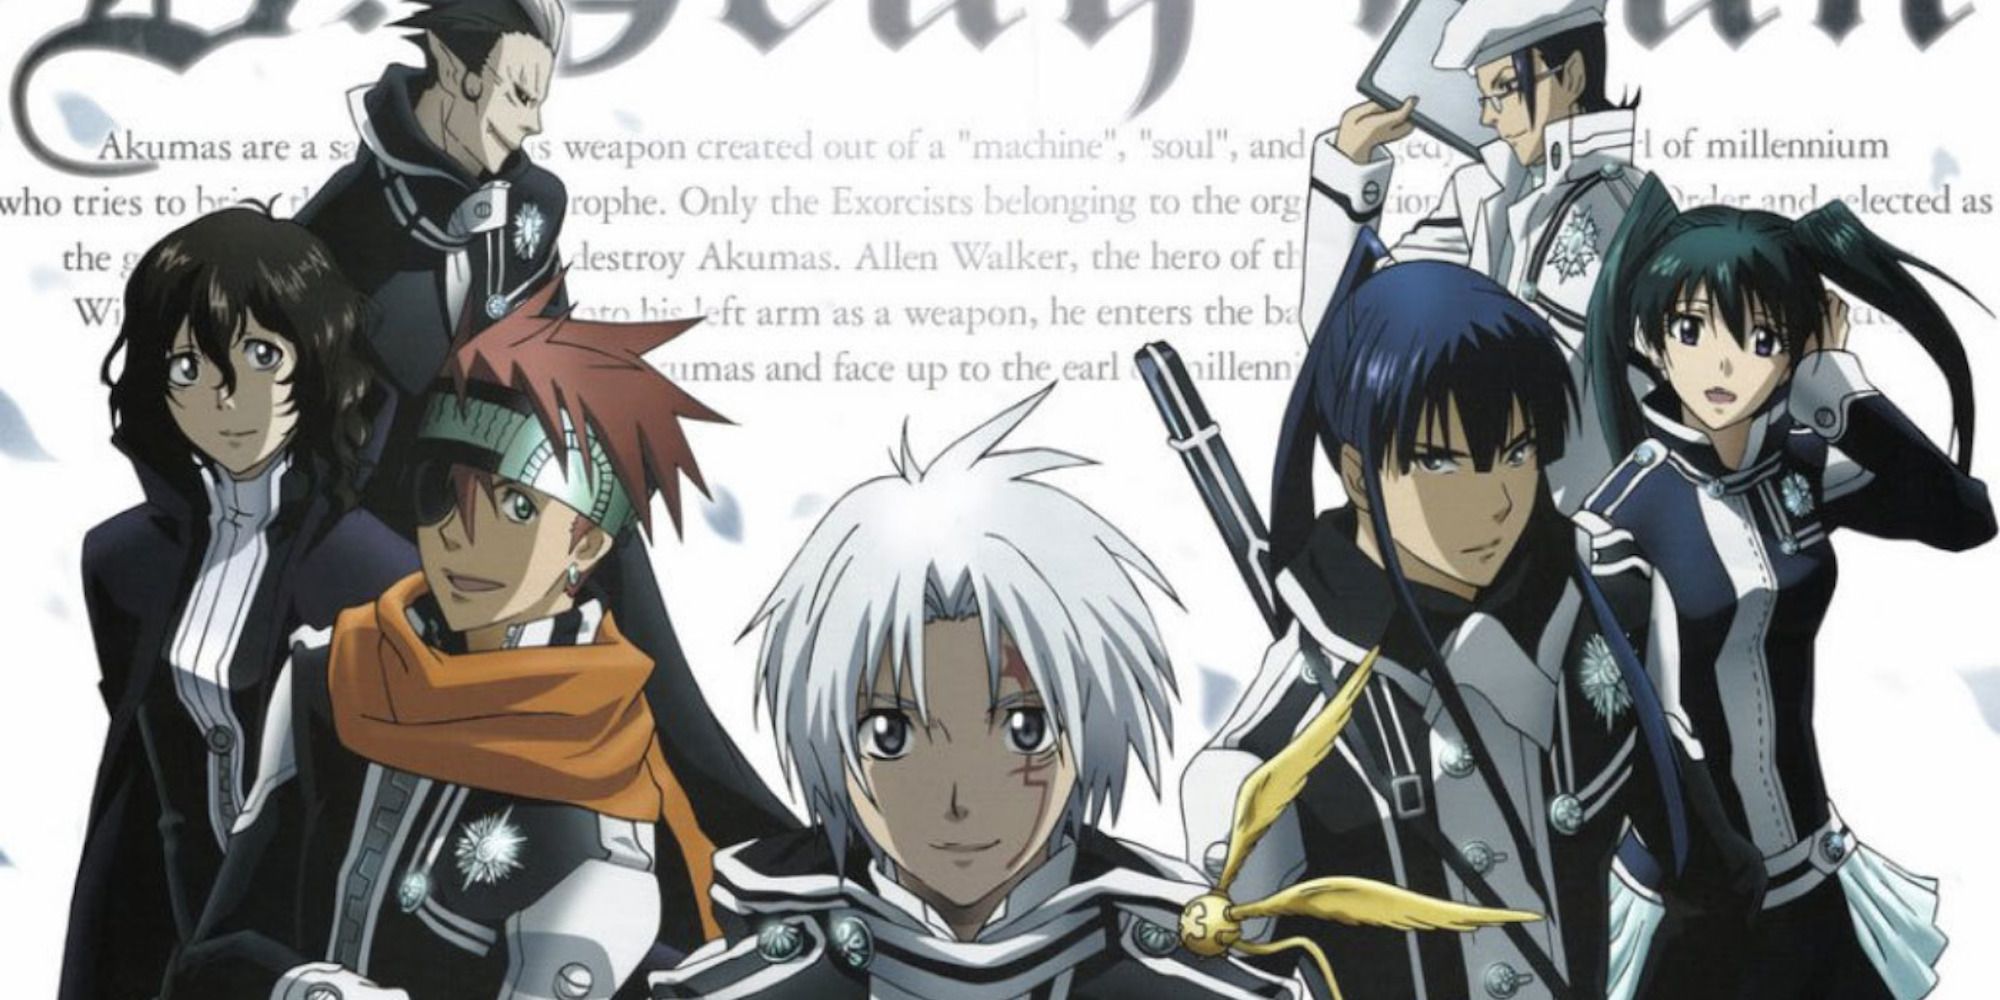 Promo art featuring characters from D.Grey-man